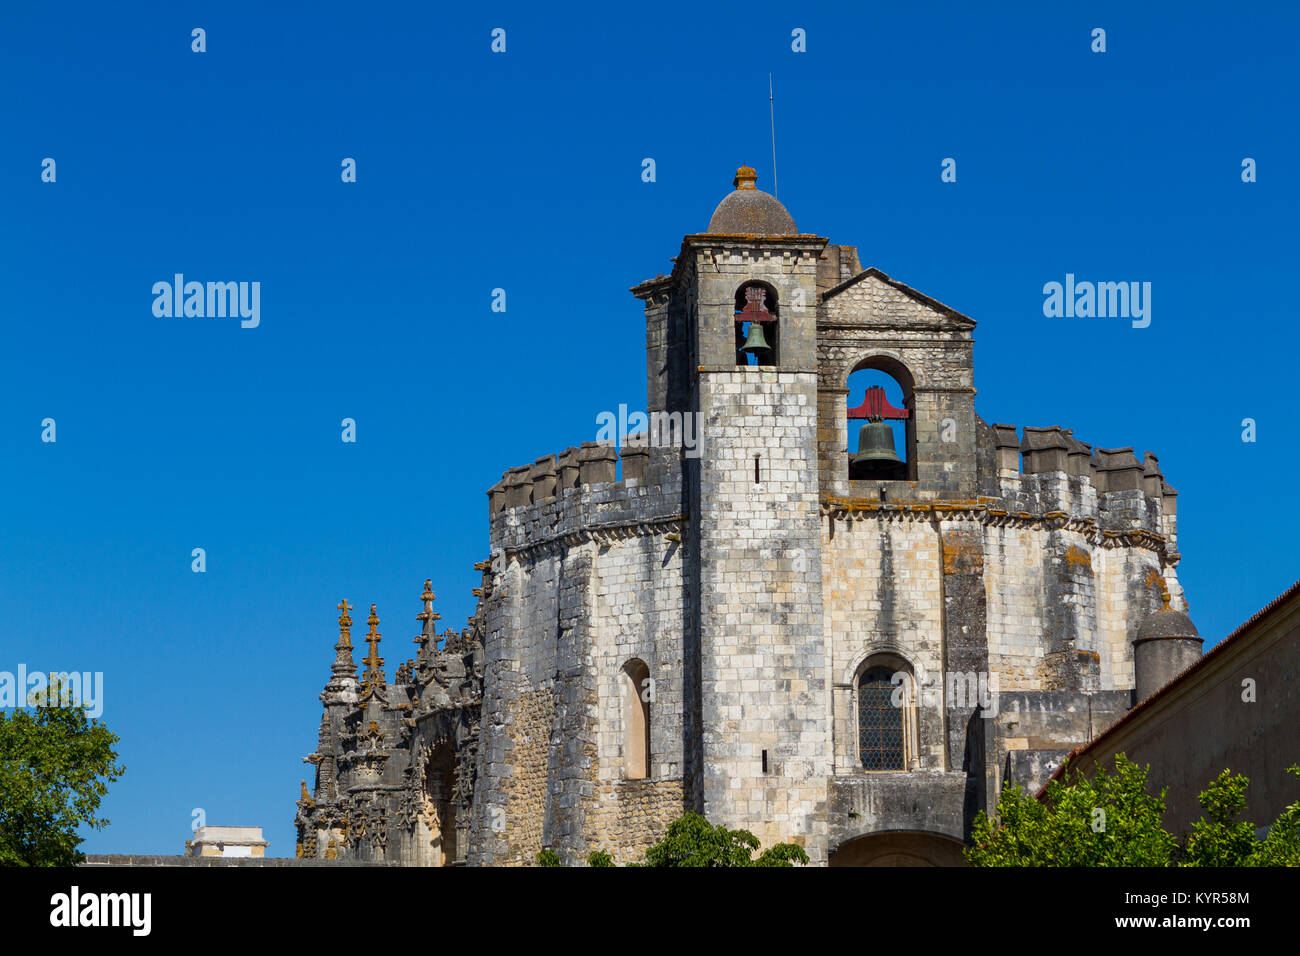 Convent of Christ, Tomar Portugal Stock Photo